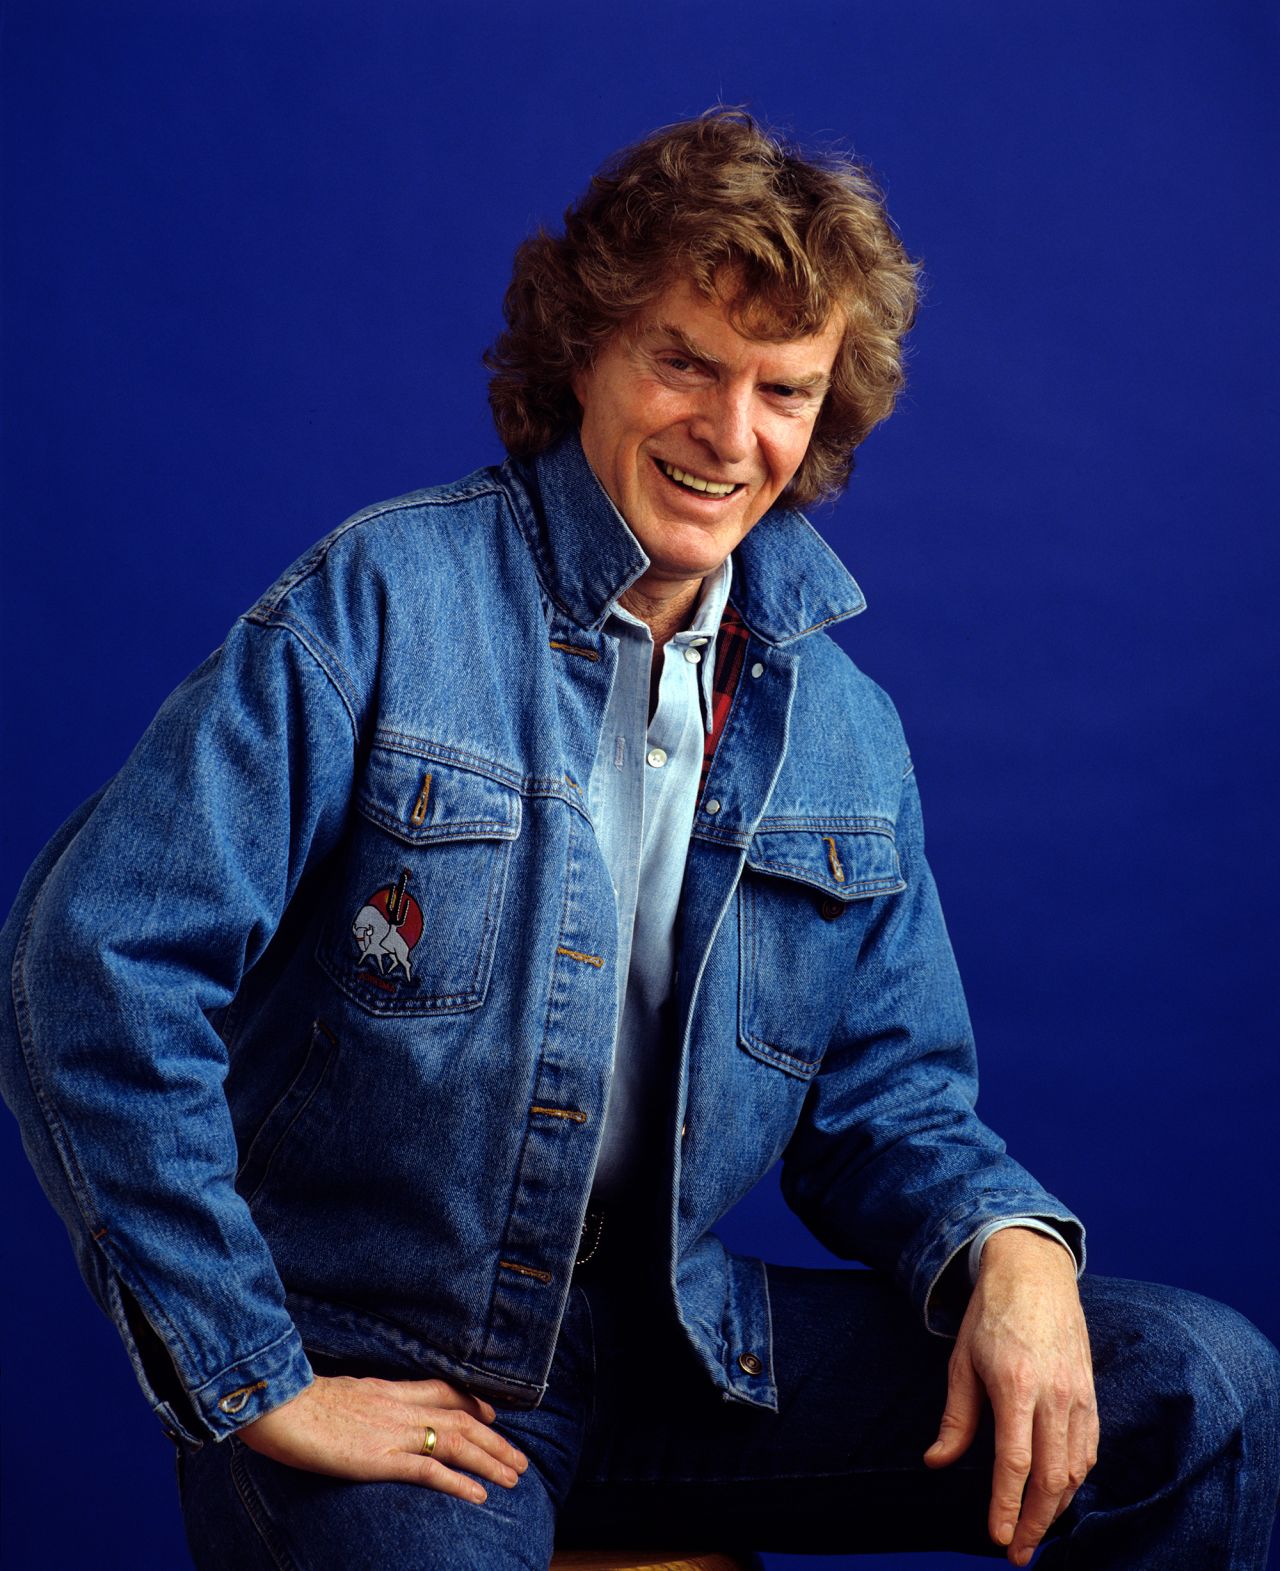 <a href="http://www.cnn.com/2019/12/27/media/don-imus-death-trnd/index.html" target="_blank">Don Imus</a>, a former radio shock jock and media personality, died on December 27, according to his family. He was 79. 